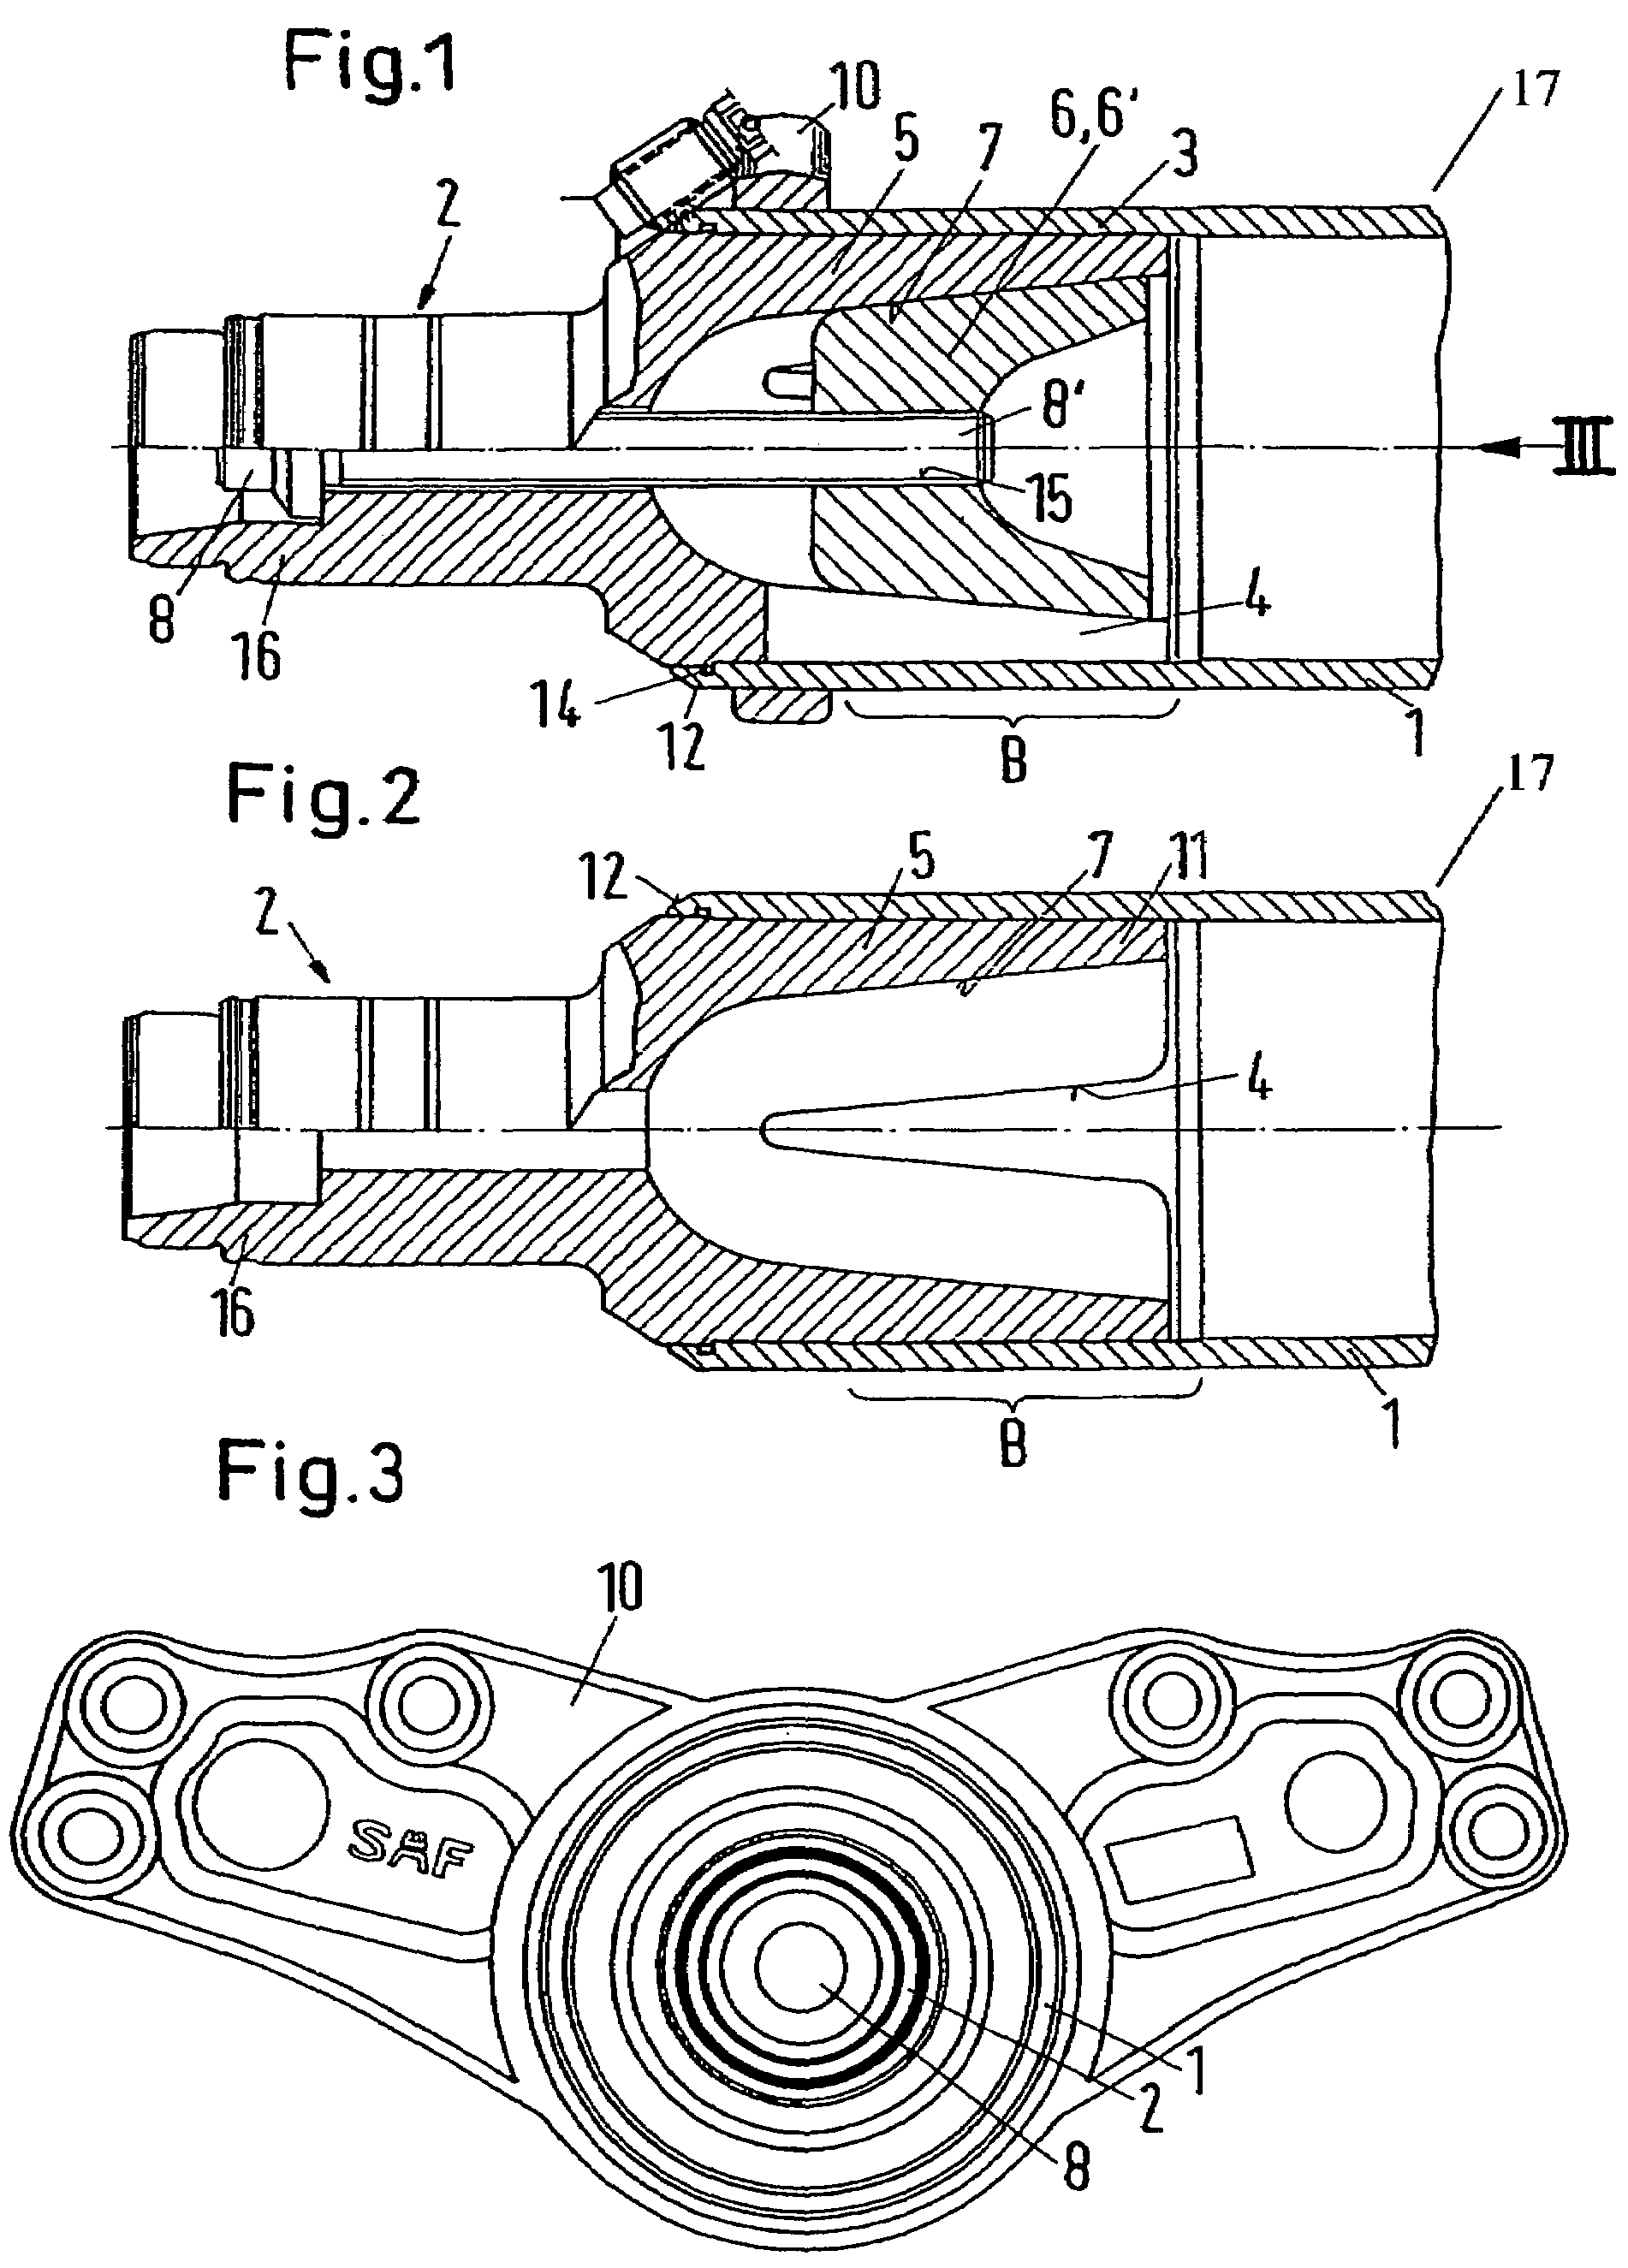 Axle journal mounted to axle tube and method of assembly